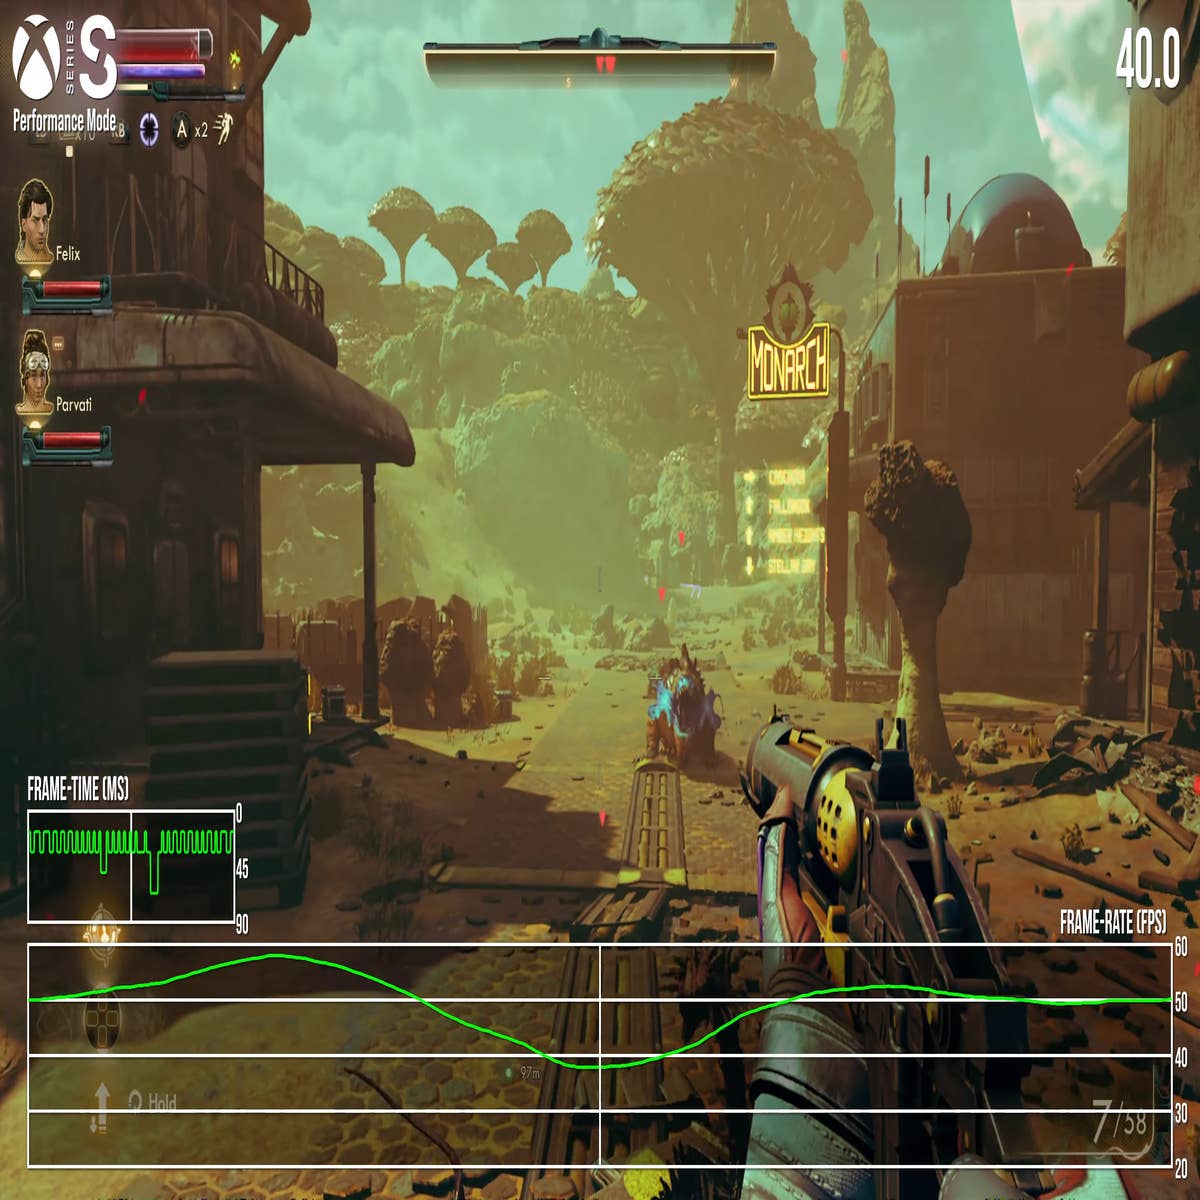 The Outer Worlds System Requirements 2019 & 2020